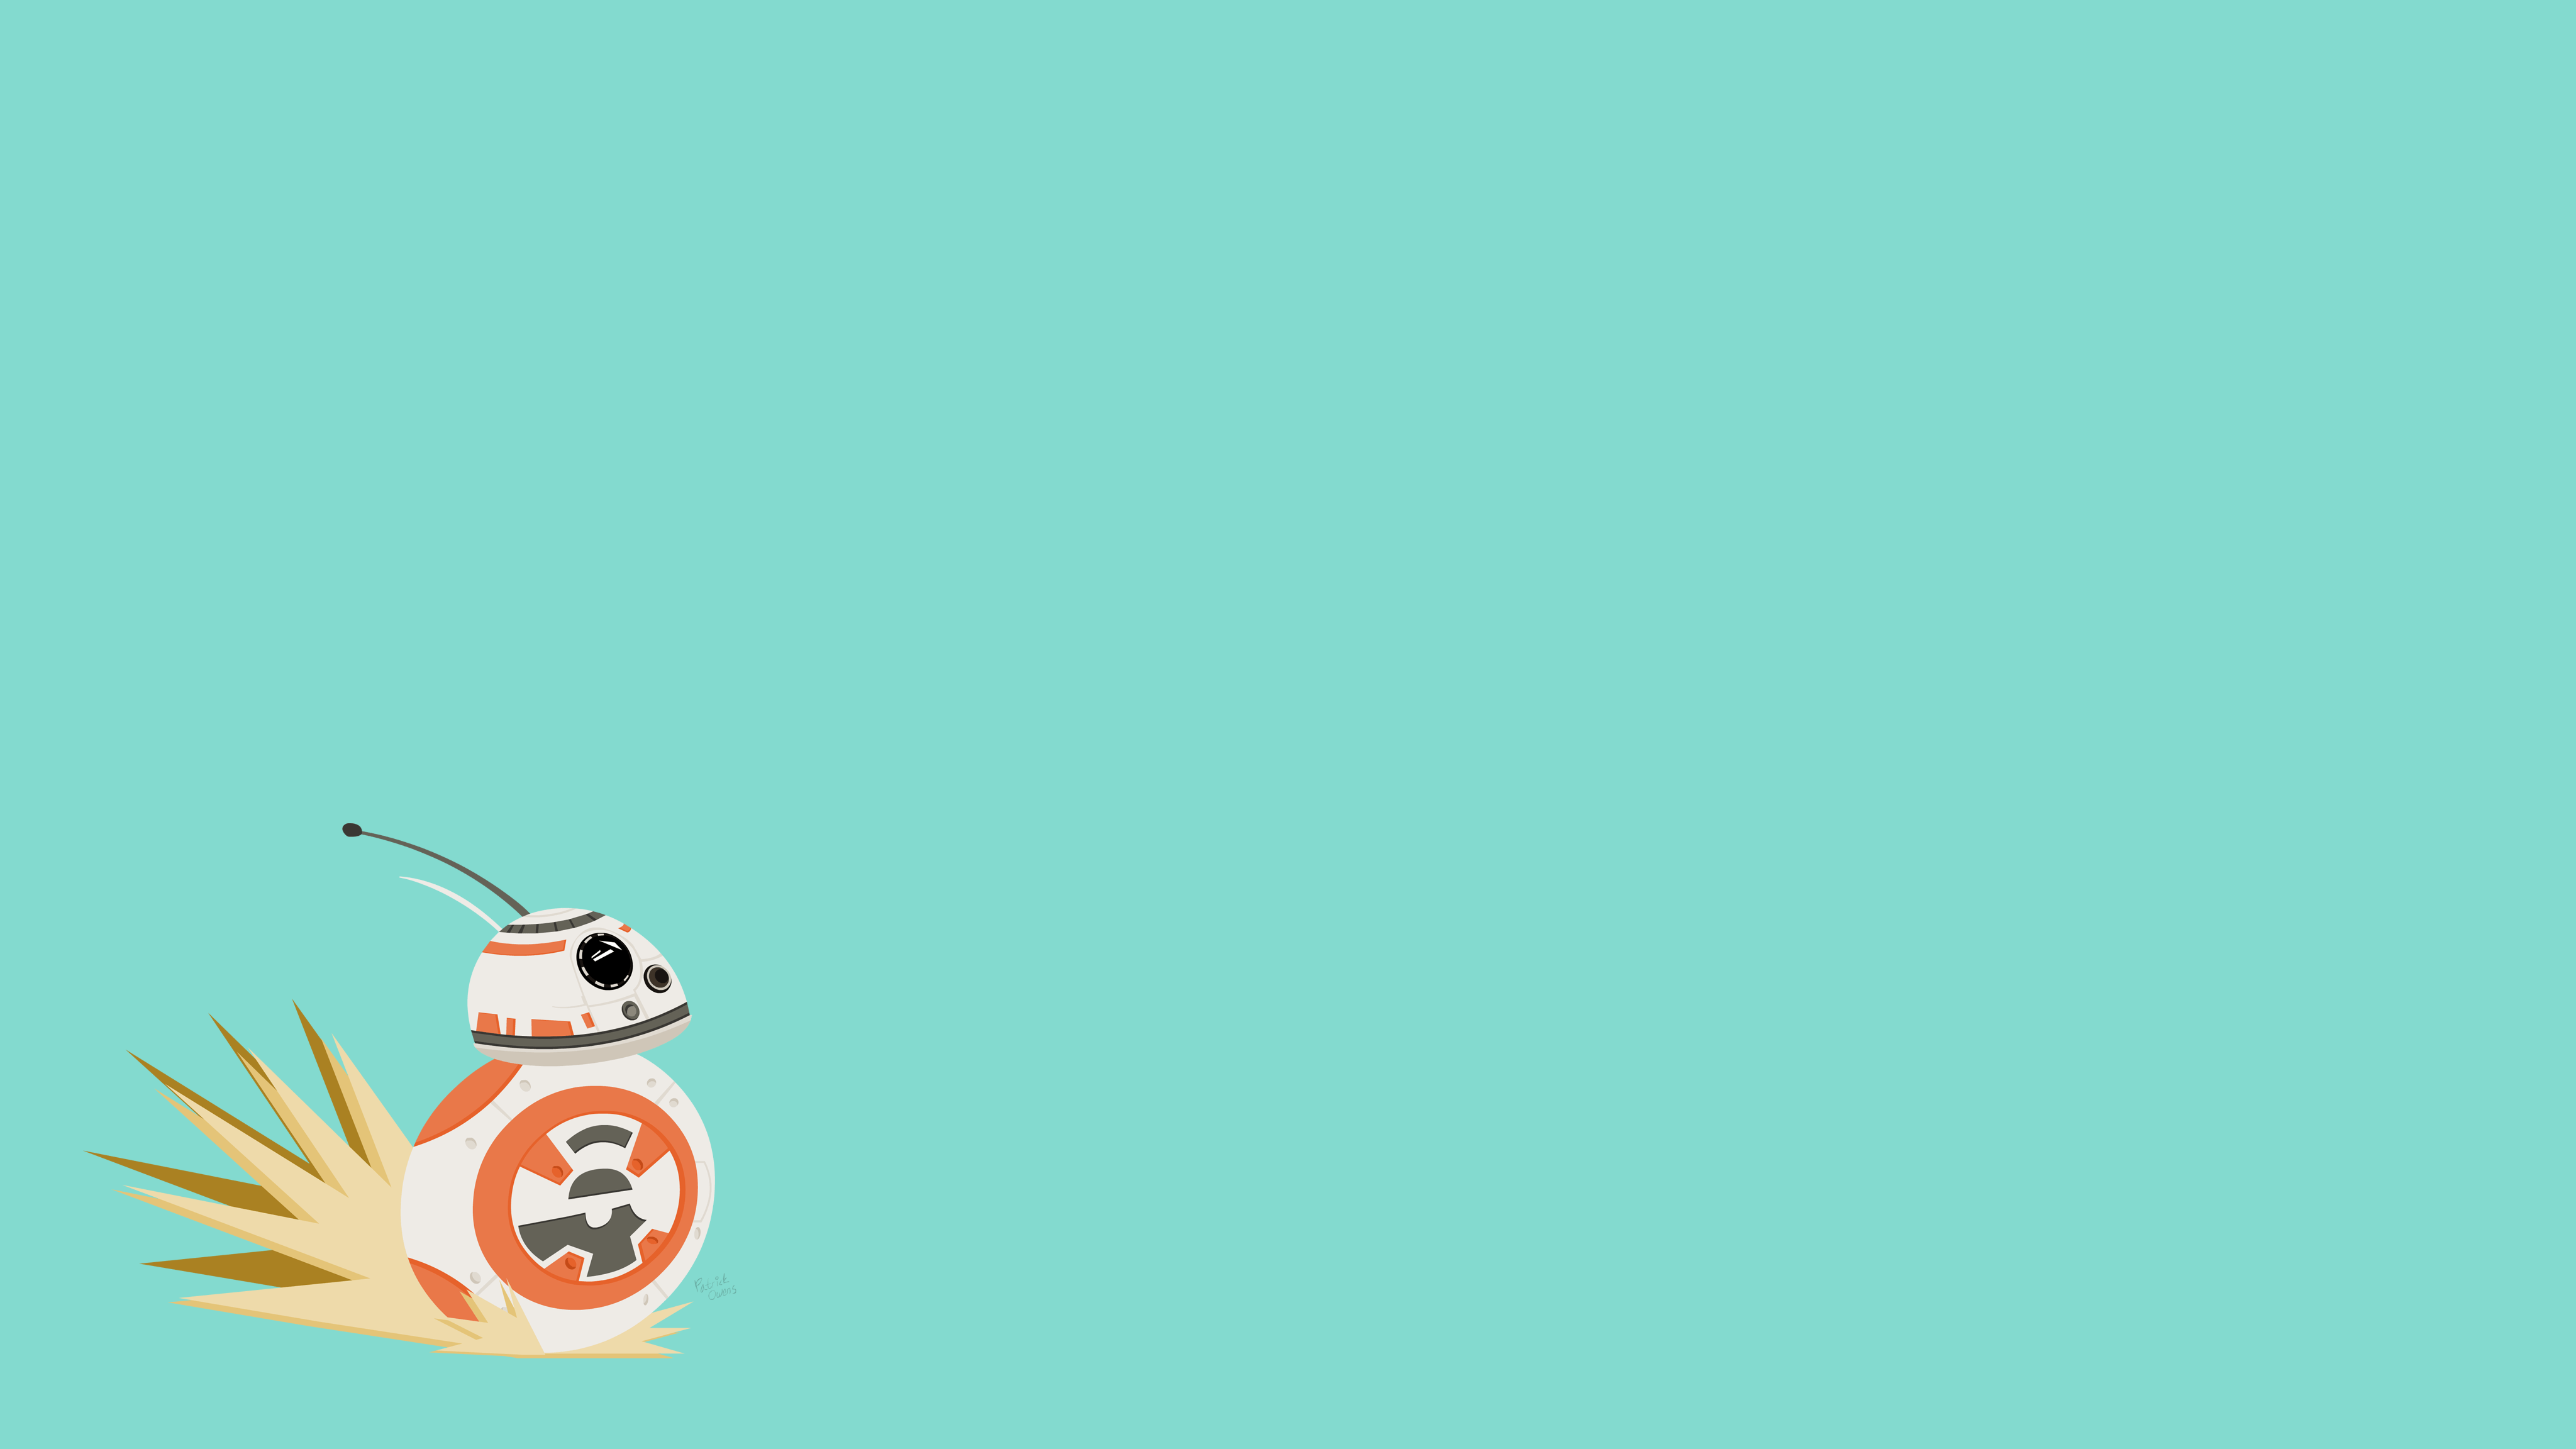 New BB 8 High Res Wallpaper That My Friend Made